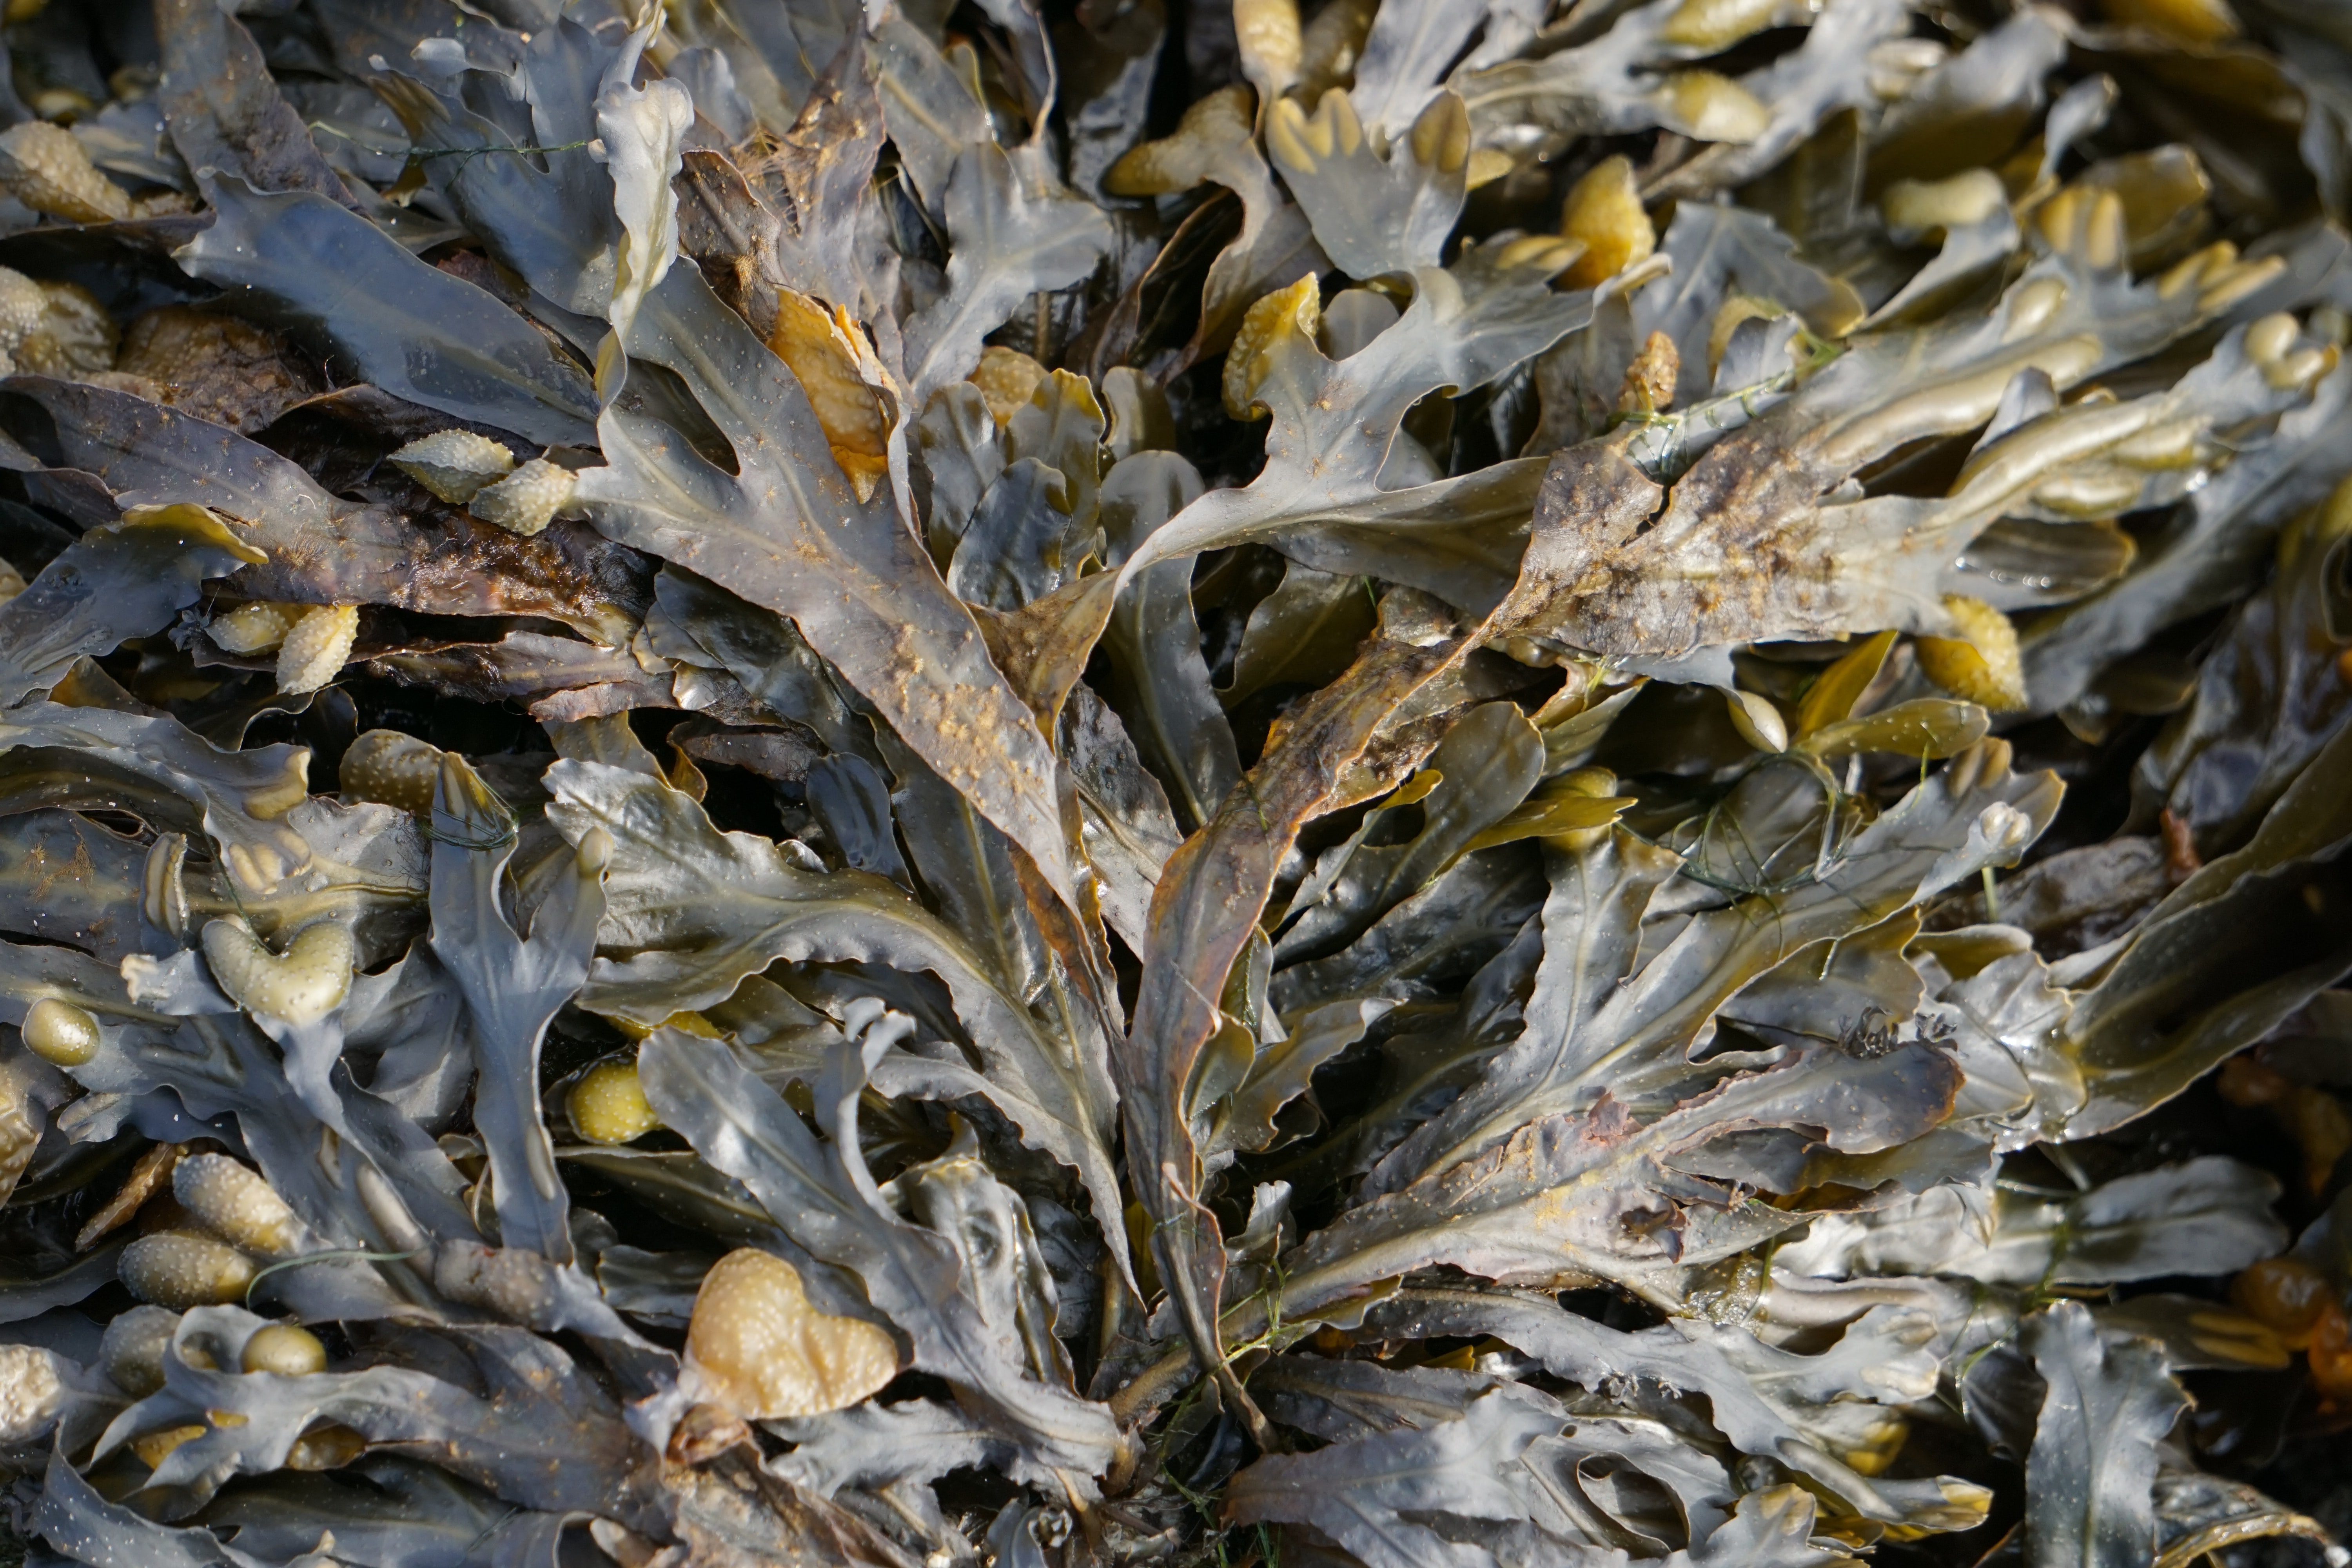 A system for Red Seaweed culture